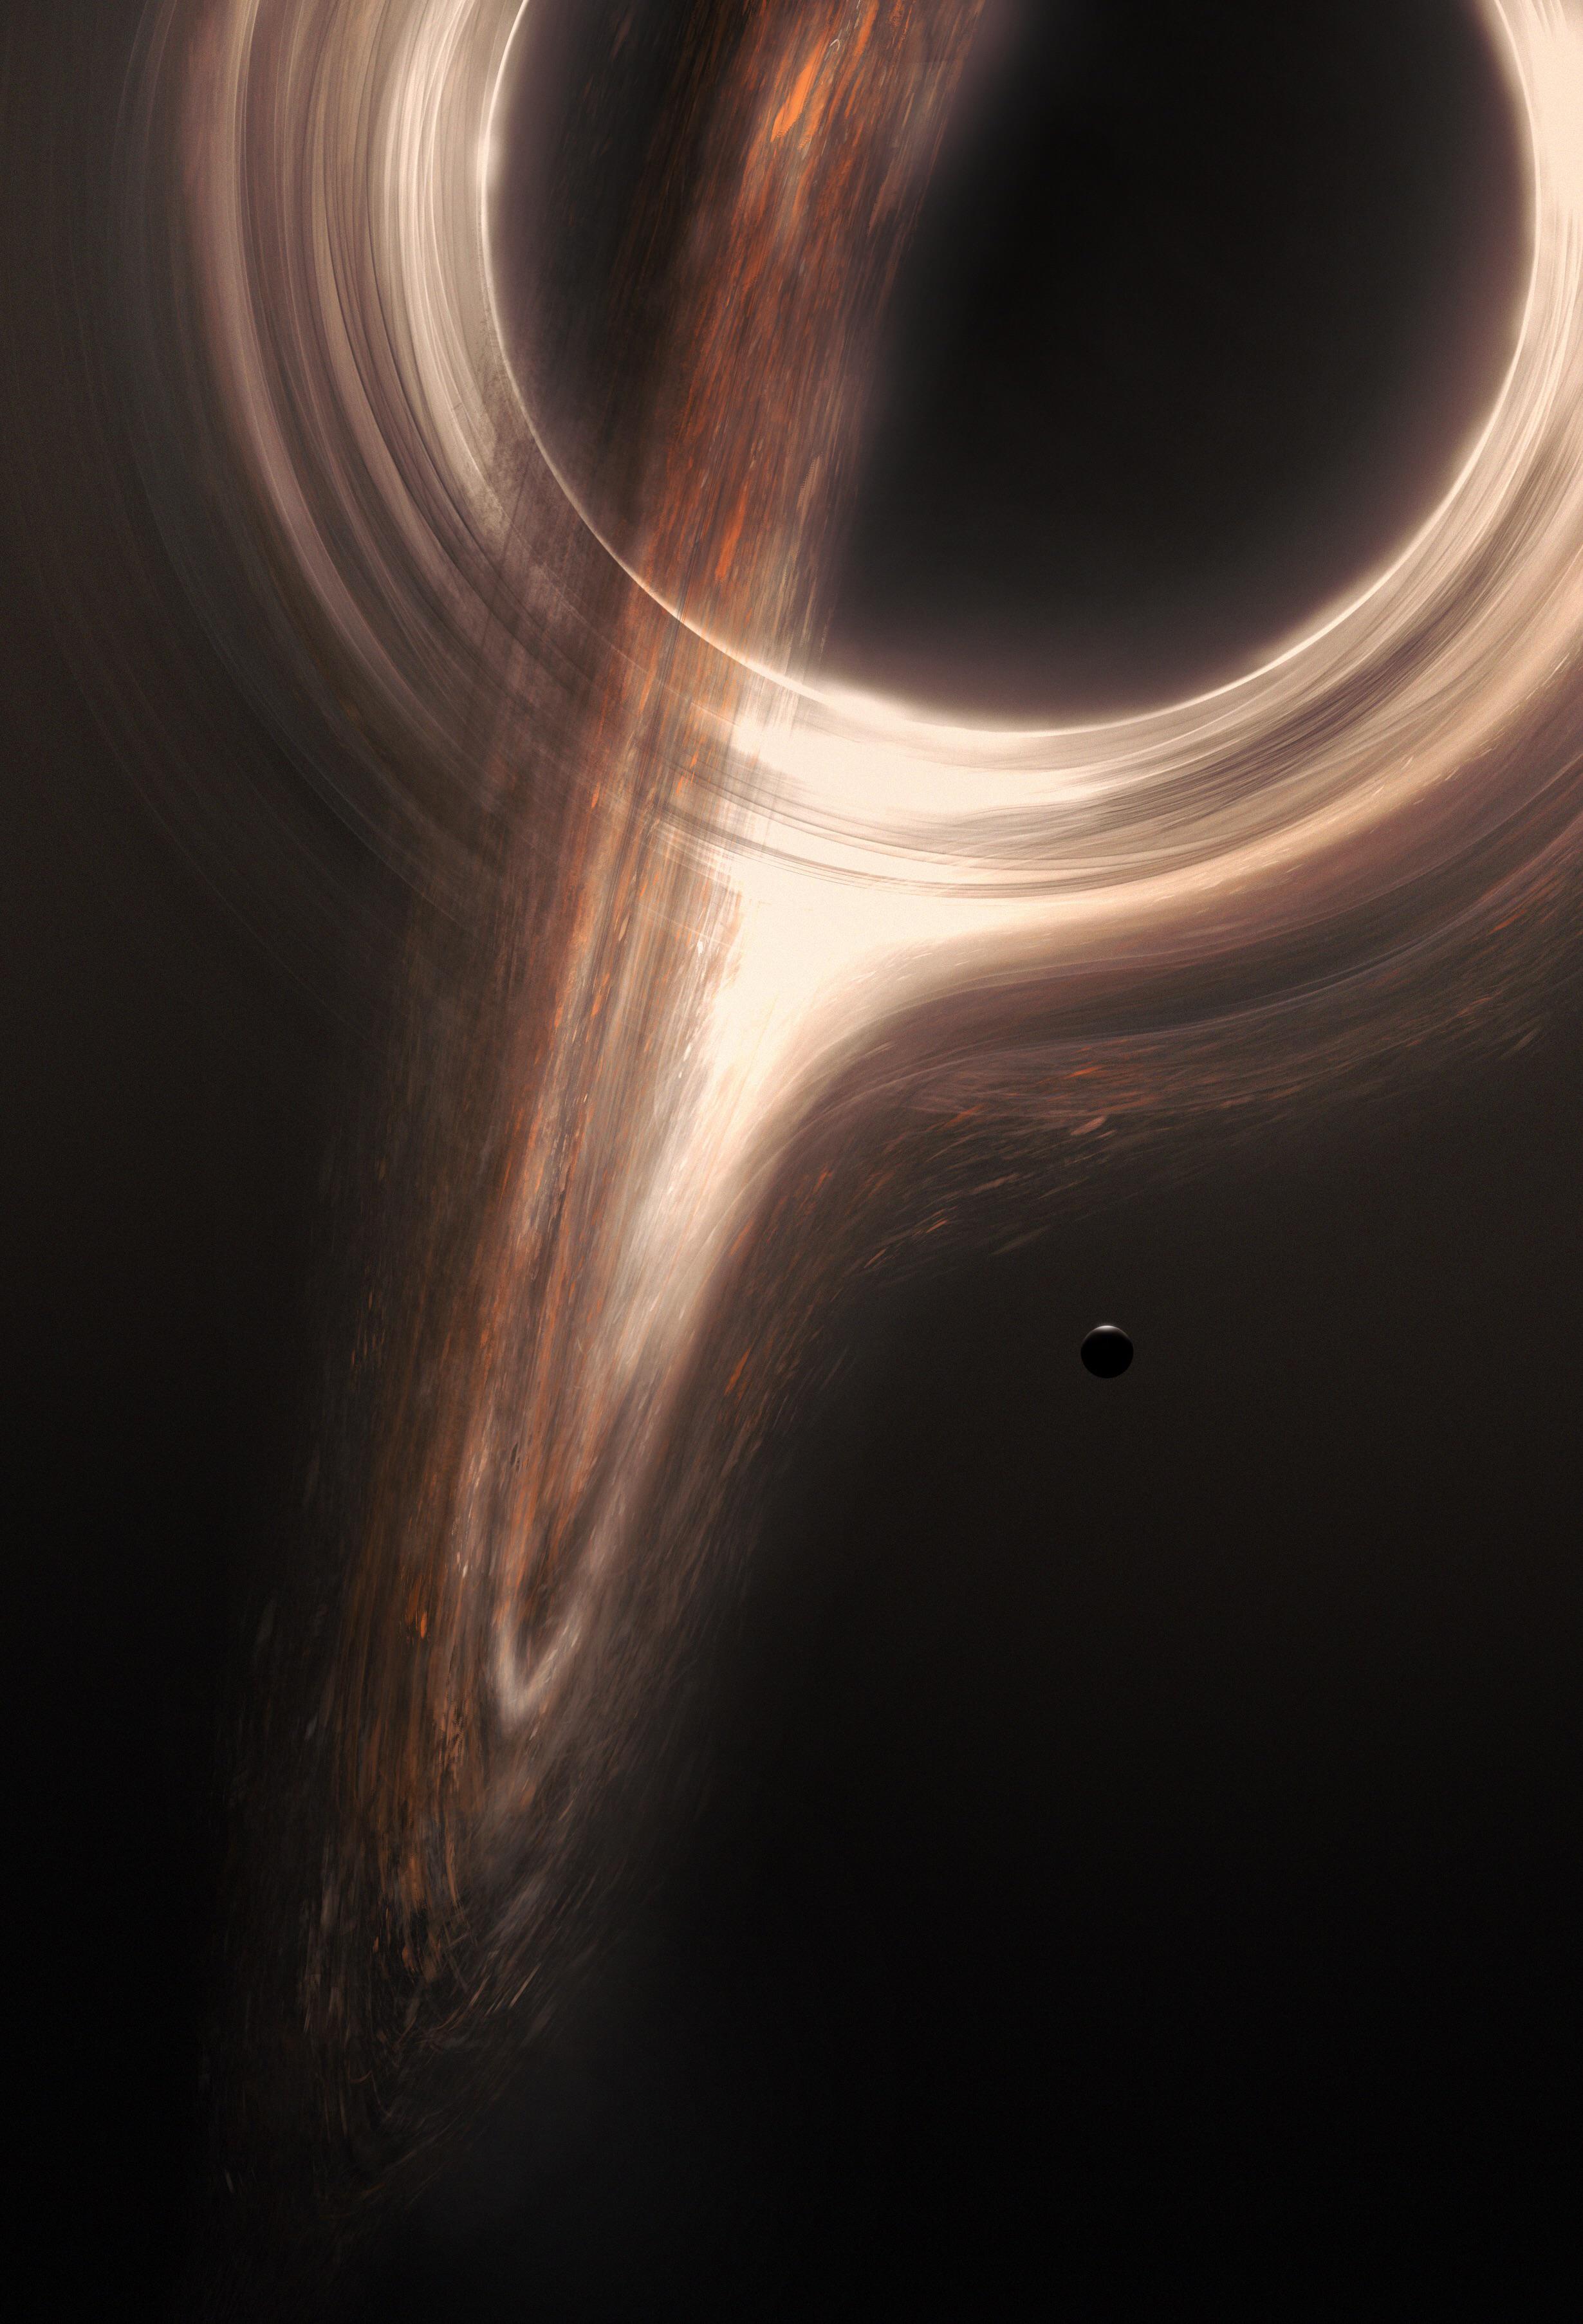 Someone told me to post my digital drawing of the Interstellar's black hole I did here, I hope you like it!!!